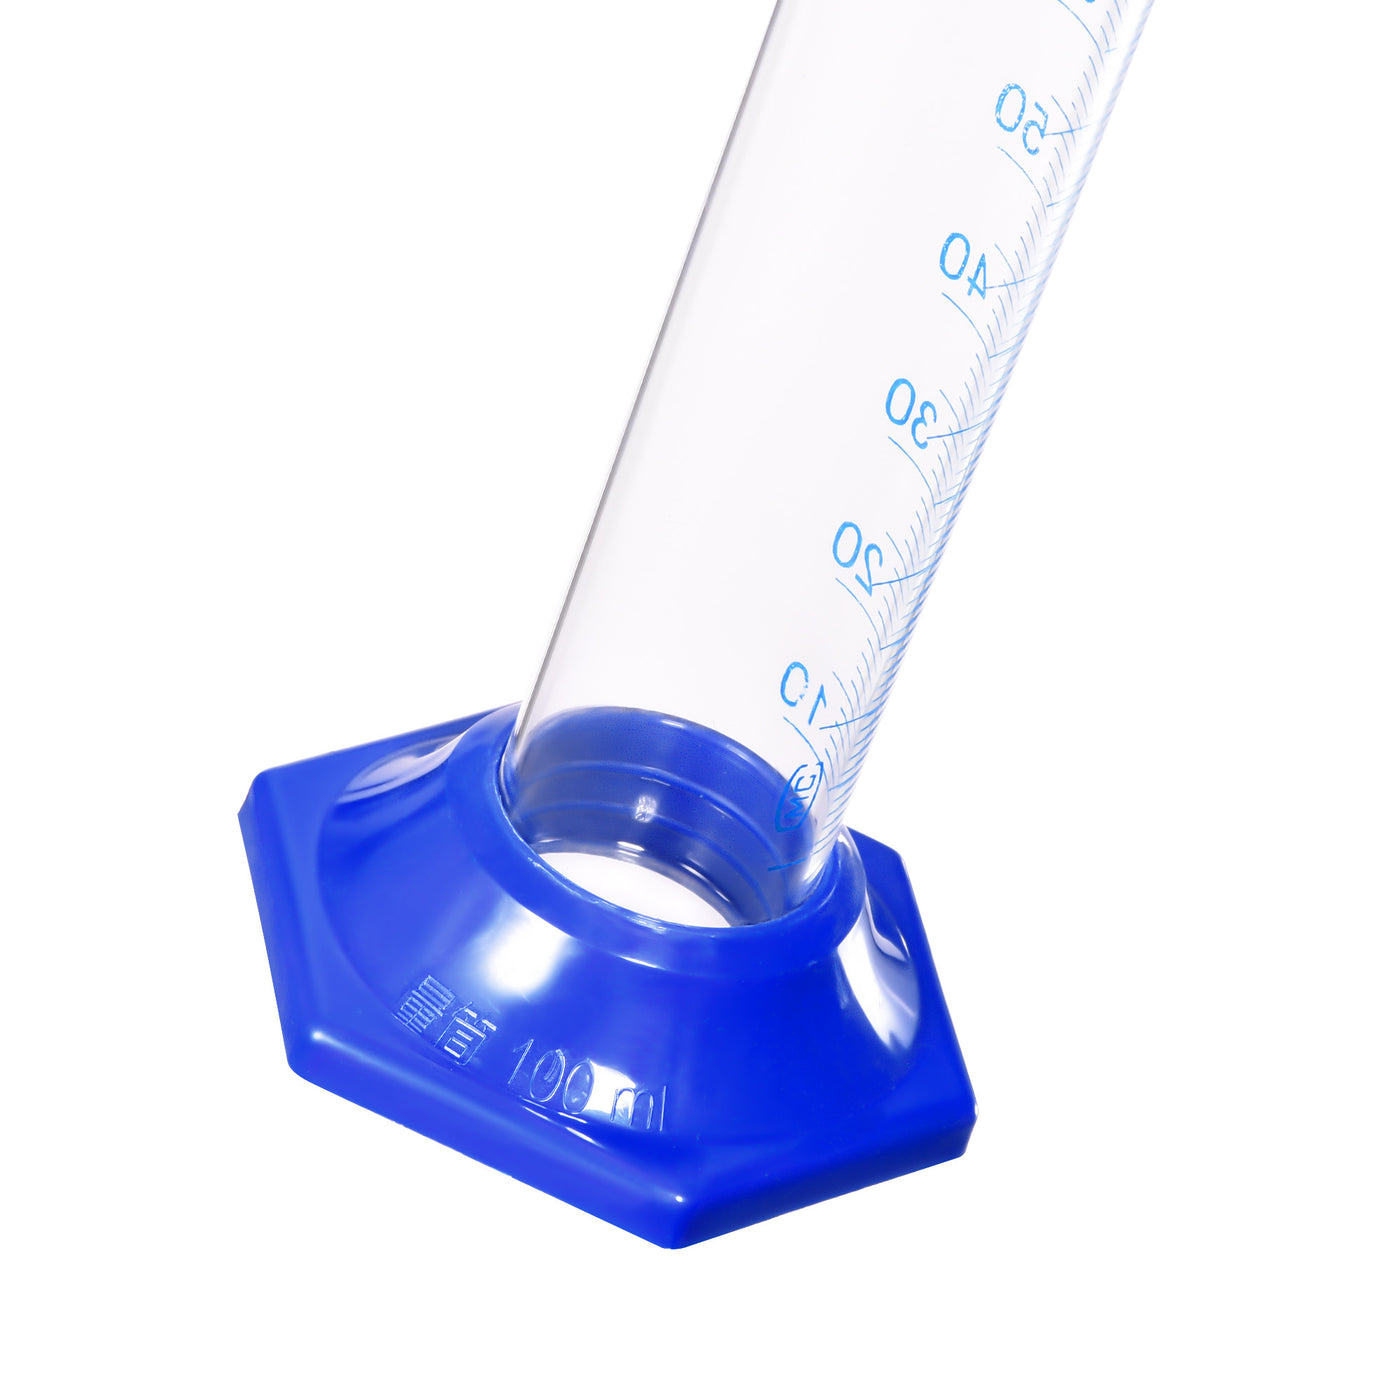 uxcell Uxcell Borosilicate Glass Graduated Cylinder, 100ml Measuring Cylinder, Hex Base 2Pcs